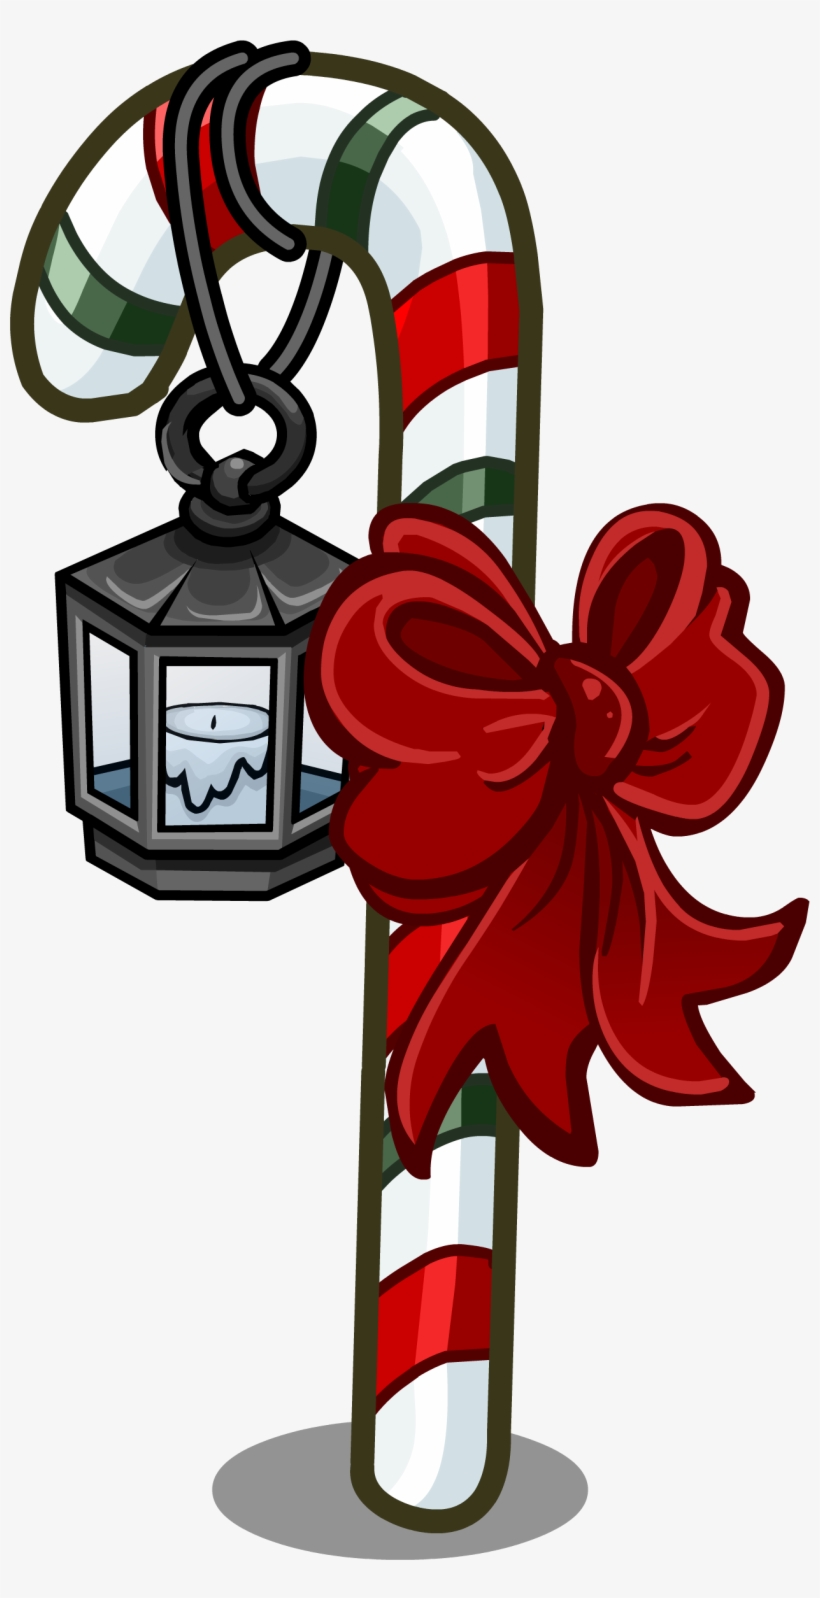 Candy Cane - Club Penguin Candy Cane, transparent png #2161257